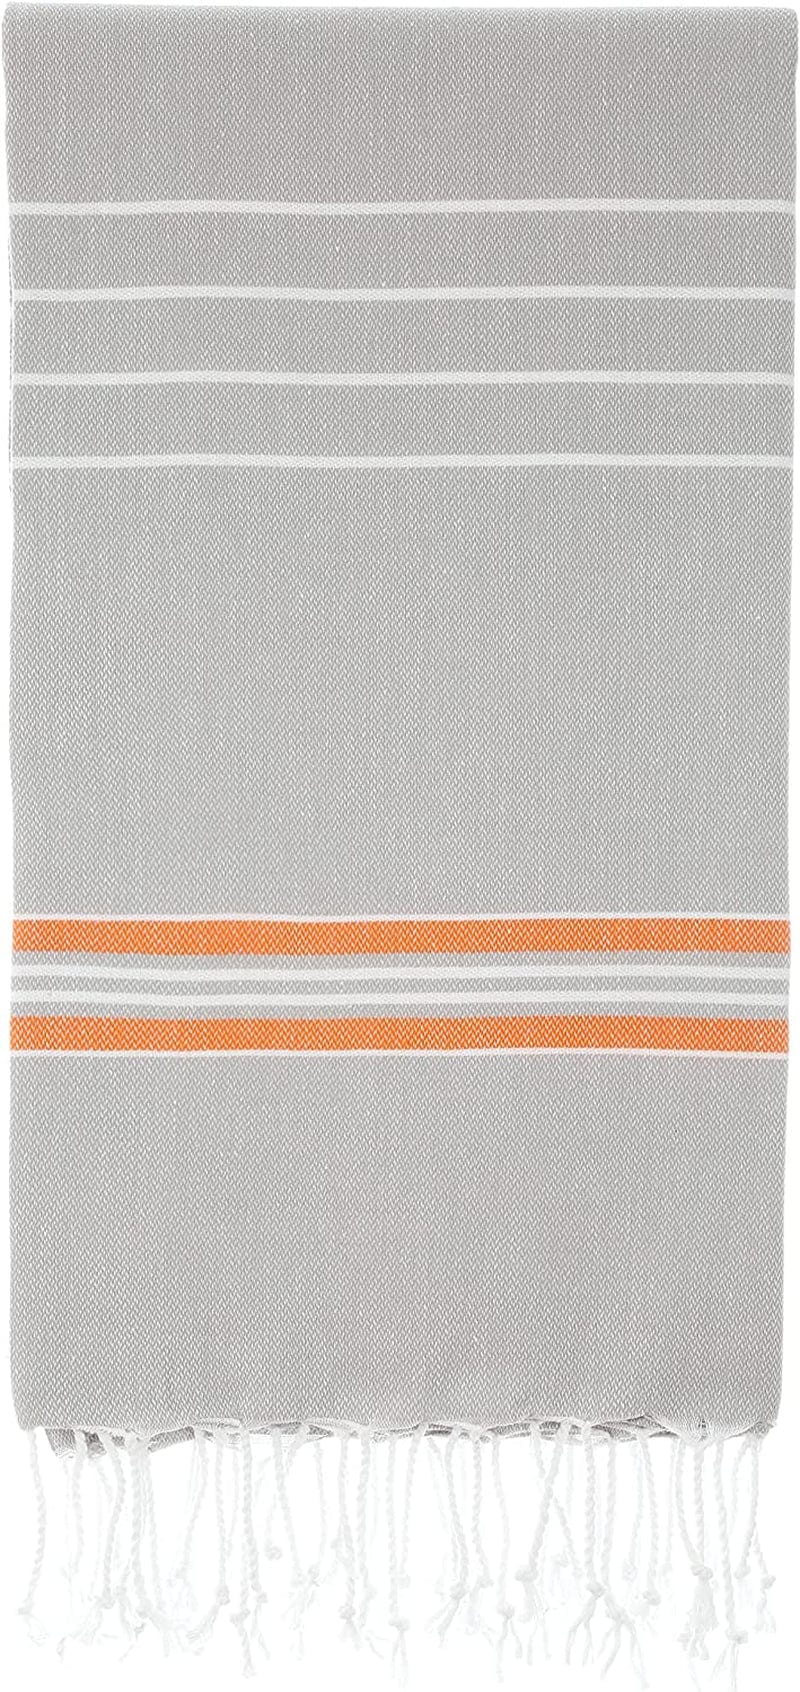 Cacala Turkish Beach Towels Quick Dry Prewashed for Soft Feel Extra Large Blanket Peshtemal for Bathroom, Travel, Pool, Swim, Yoga, Face, Hair and Gym Paradise, 37 in X 70 In, Aqua Home & Garden > Linens & Bedding > Towels Cacala Silver Grey Orange 37 in x 70 in 